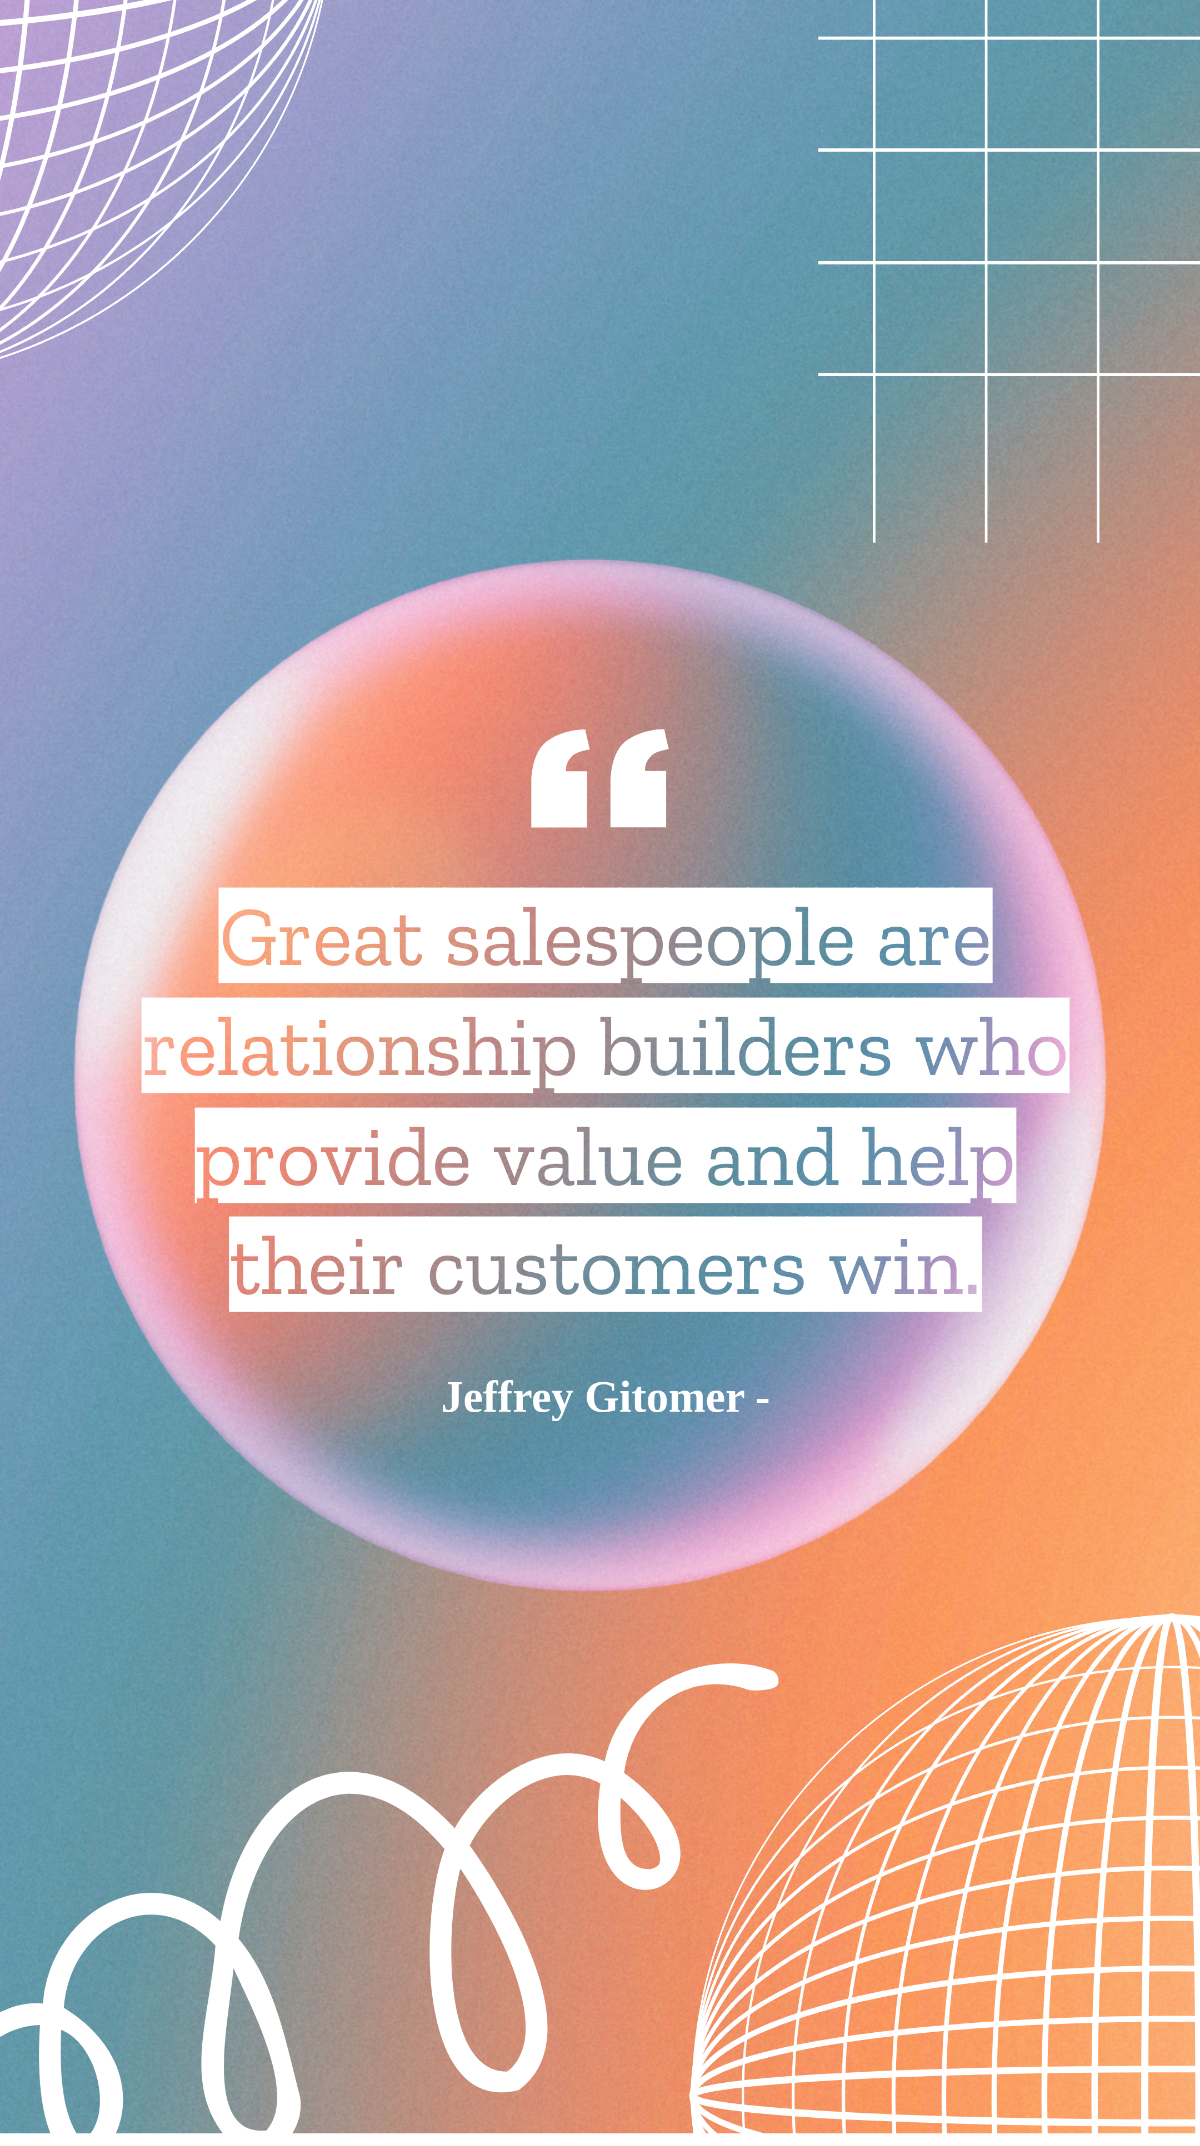 Jeffrey Gitomer - Great salespeople are relationship builders who provide value and help their customers win. Template